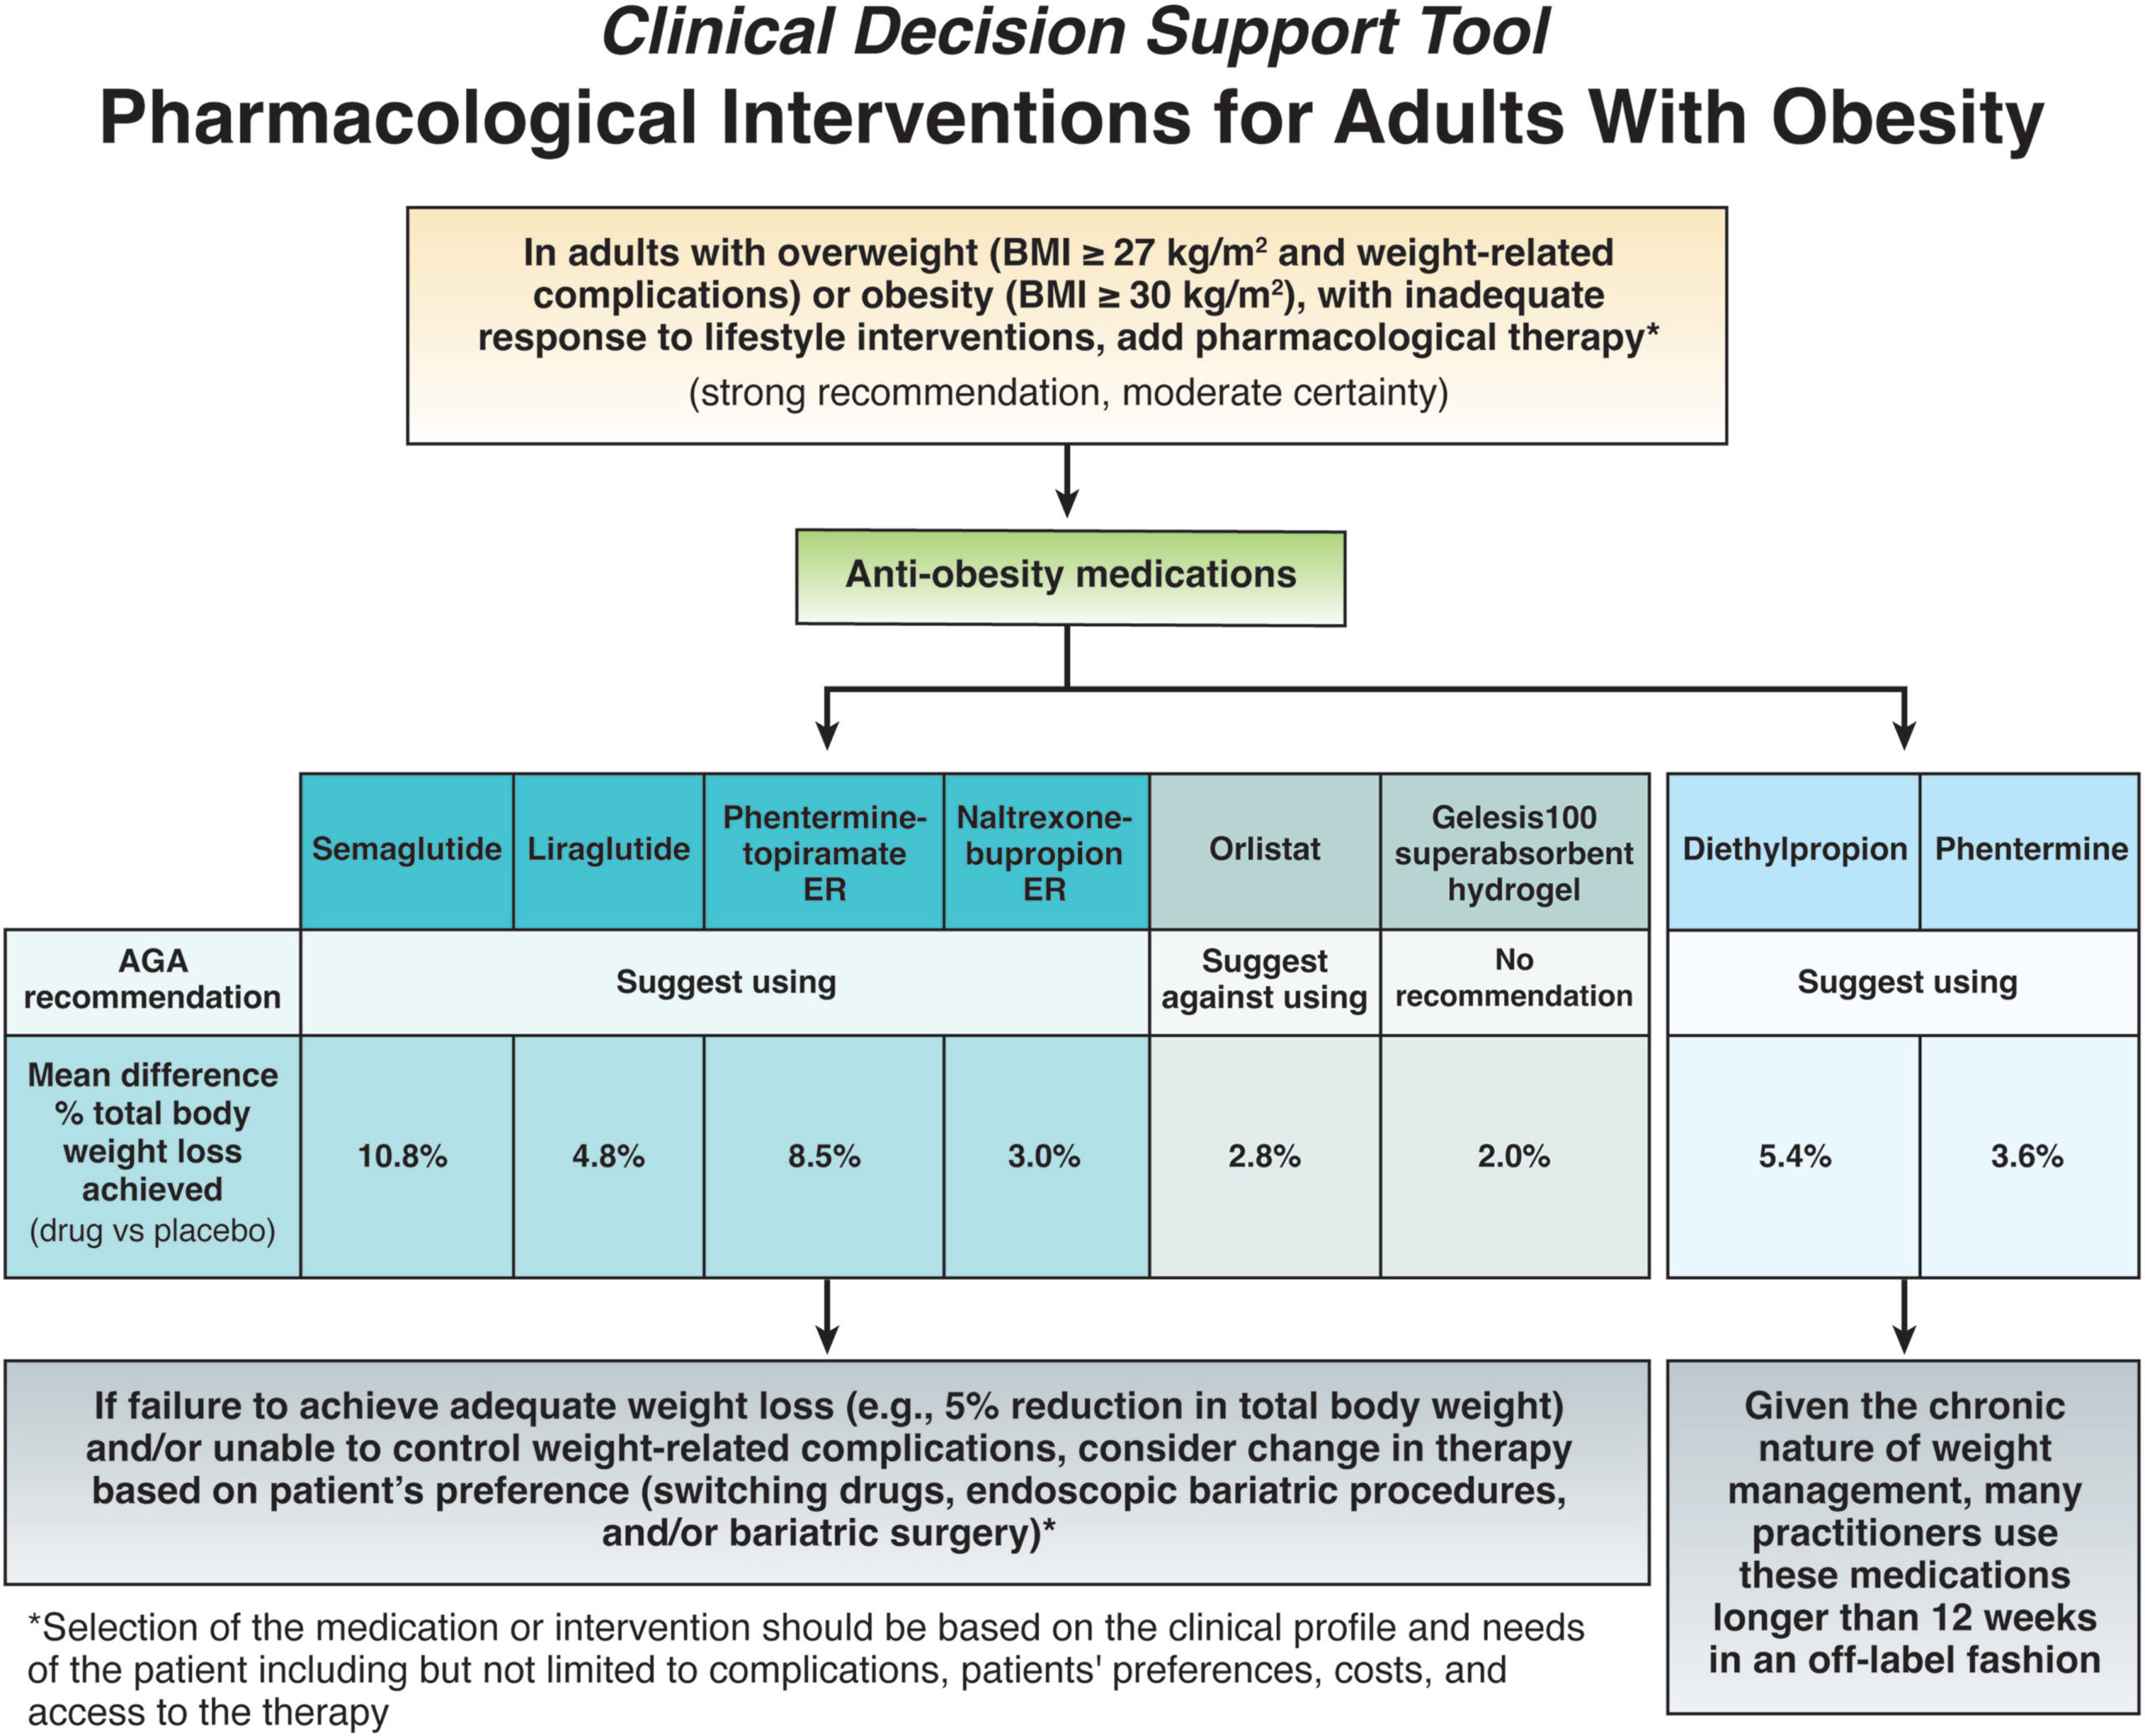 Clinical decision support tool for choosing medications for adults with obesity